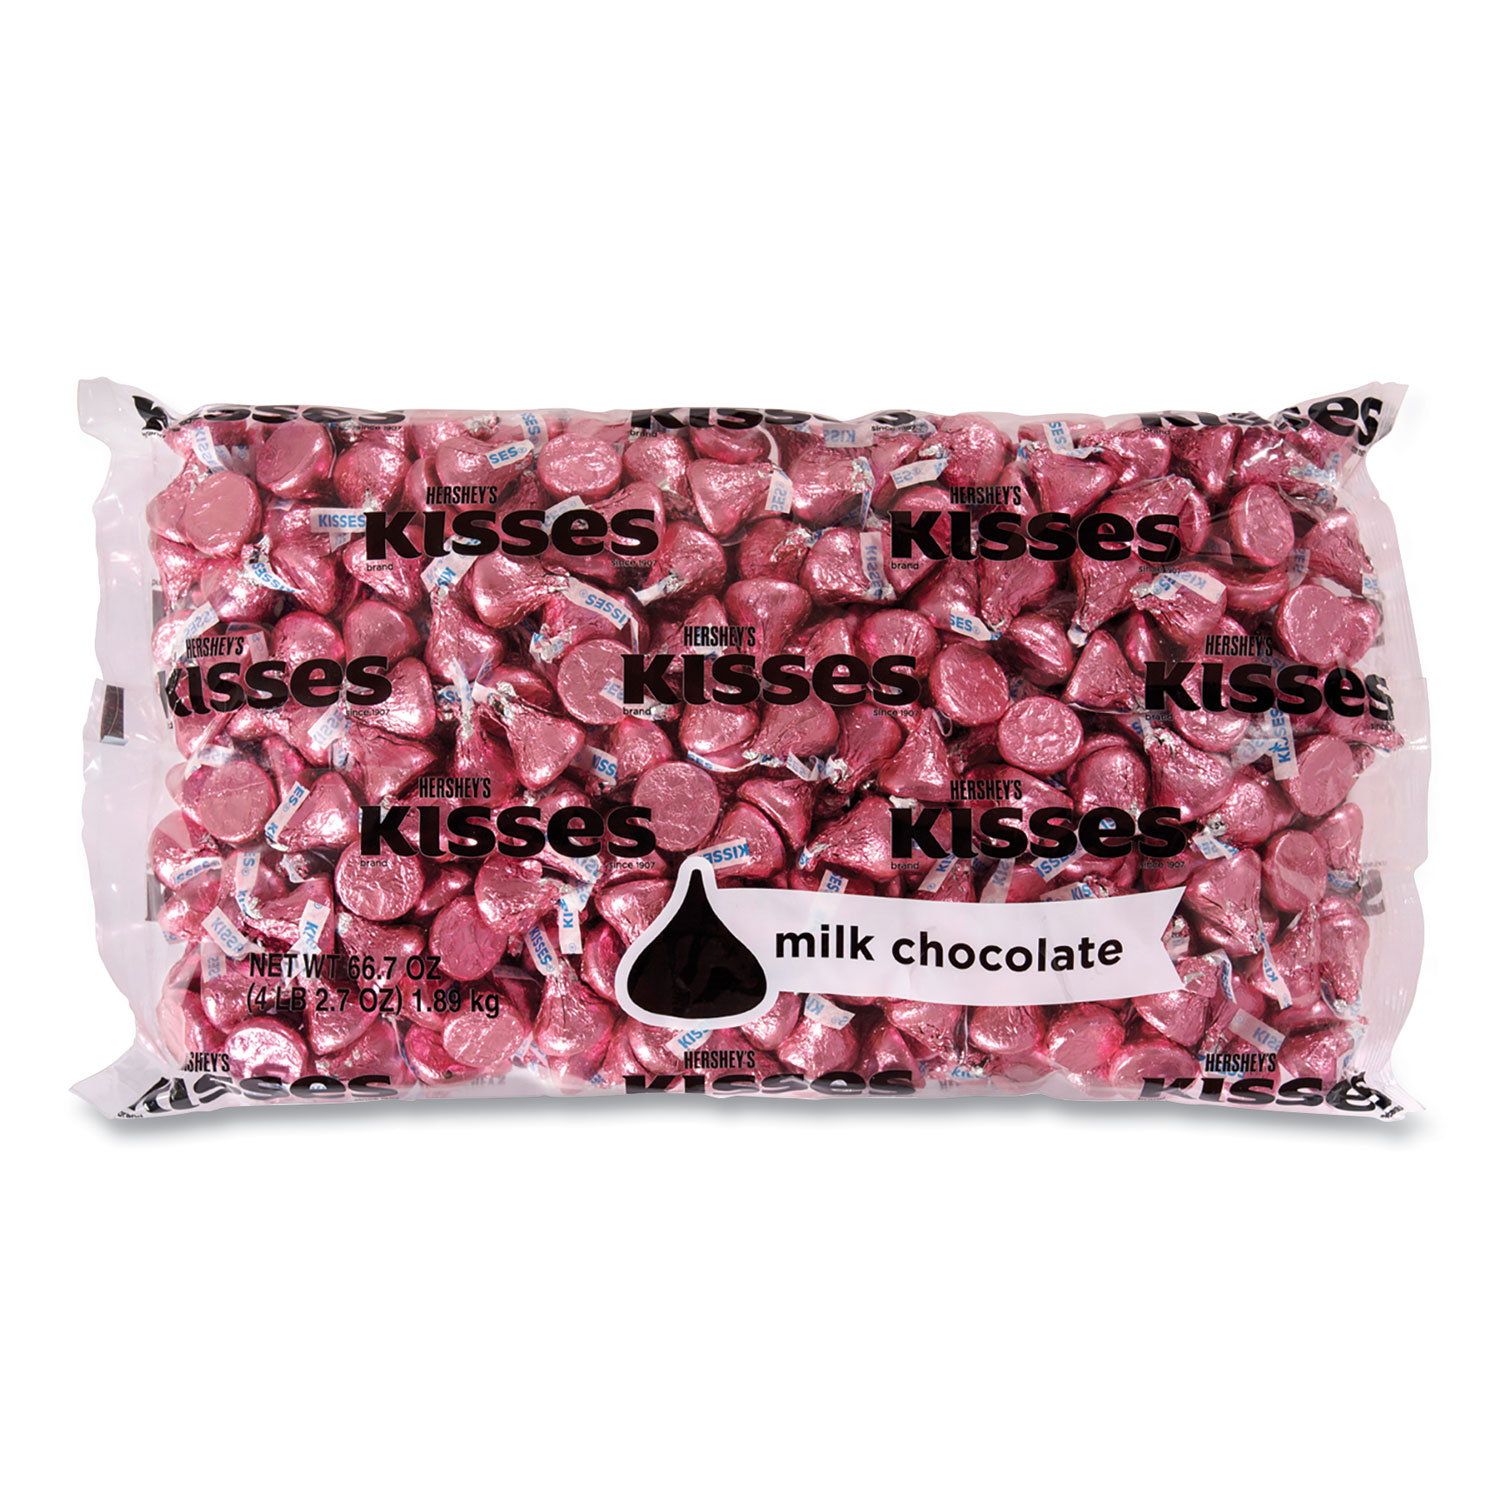  Hershey's 13343 KISSES, Milk Chocolate, Pink Wrappers, 66.7 oz Bag, Free Delivery in 1-4 Business Days (GRR24600052) 